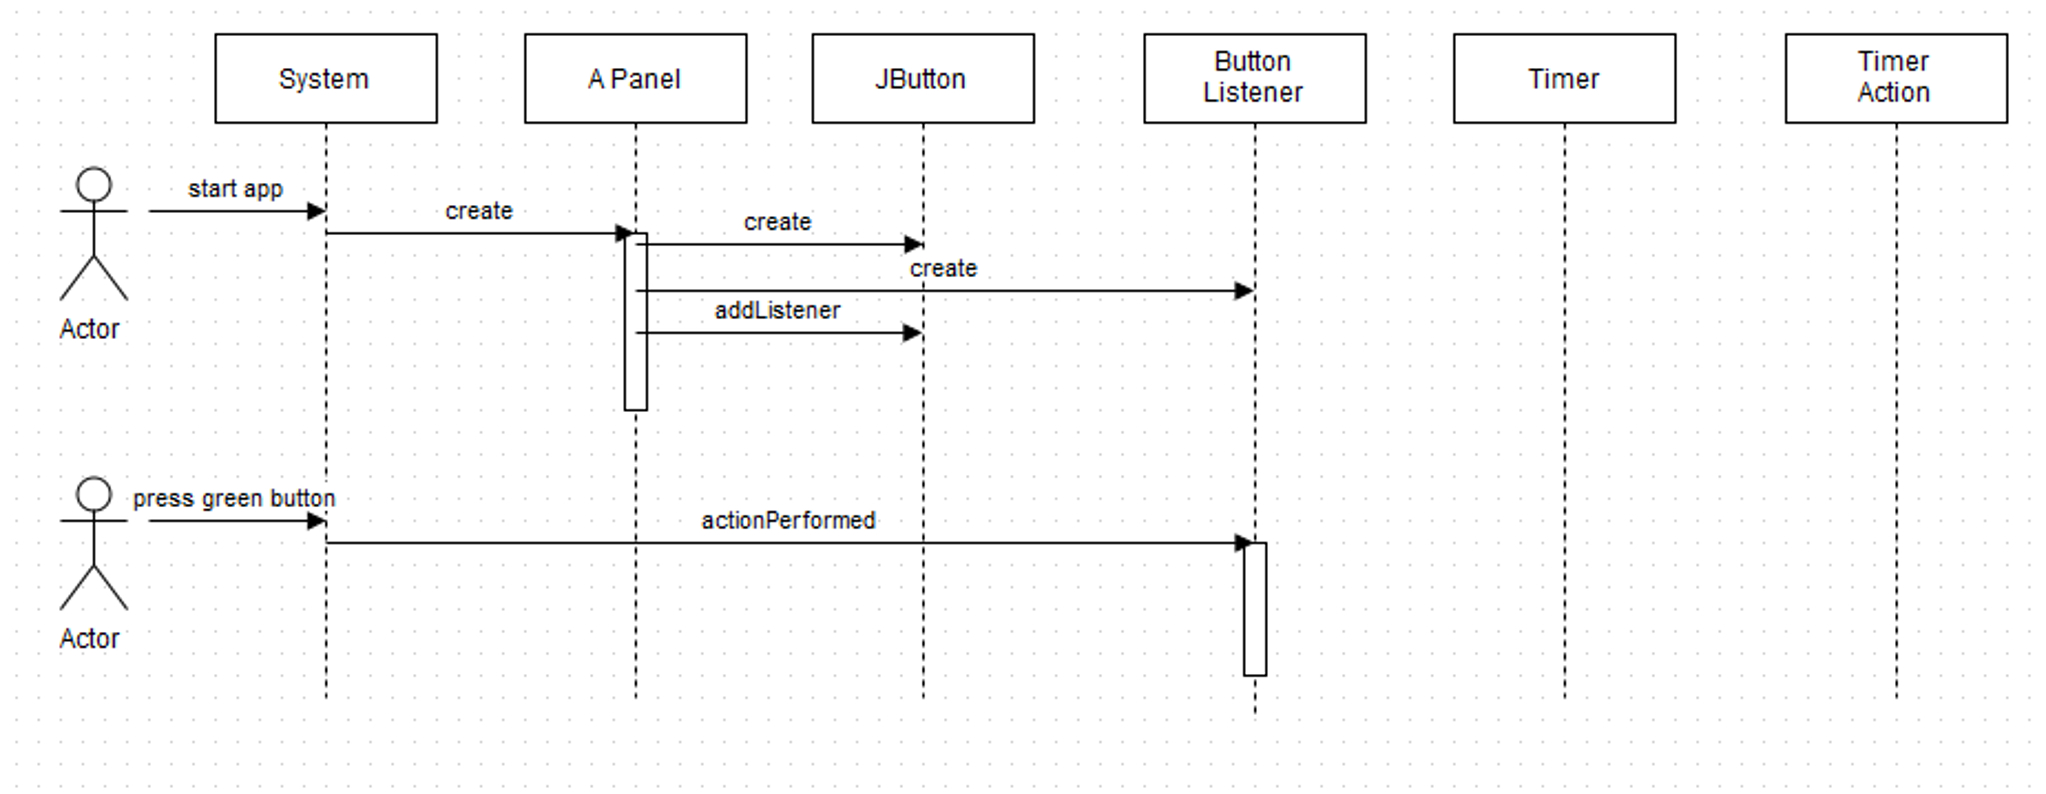 Uml Sequence Diagram Solved 1 Complete The Uml Sequence Diagram Below That Ex